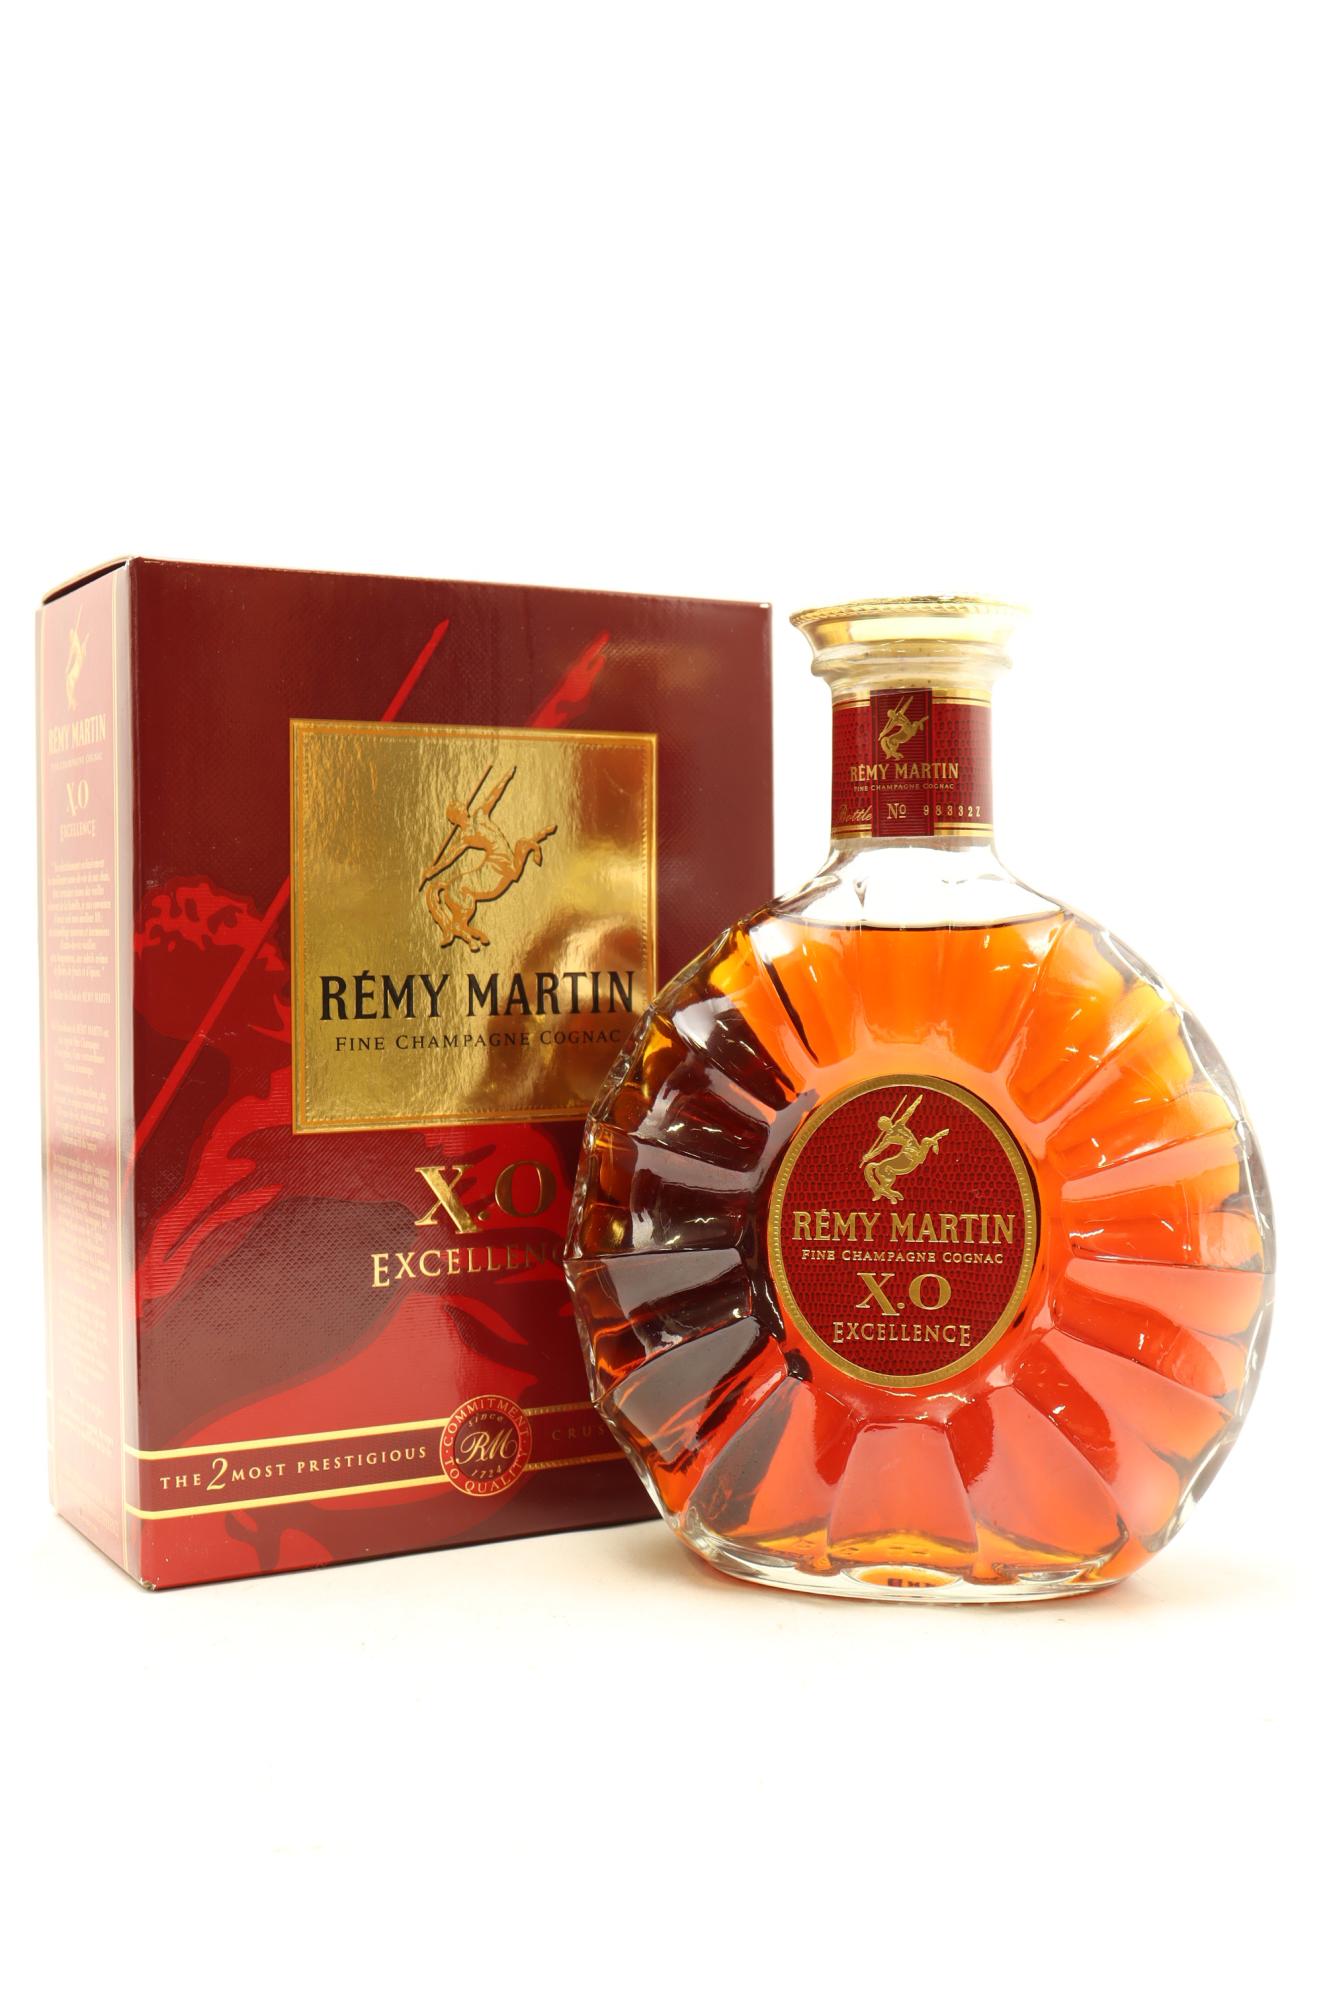 1) Remy Martin X.O. Excellence-Special Fine Champagne Cognac